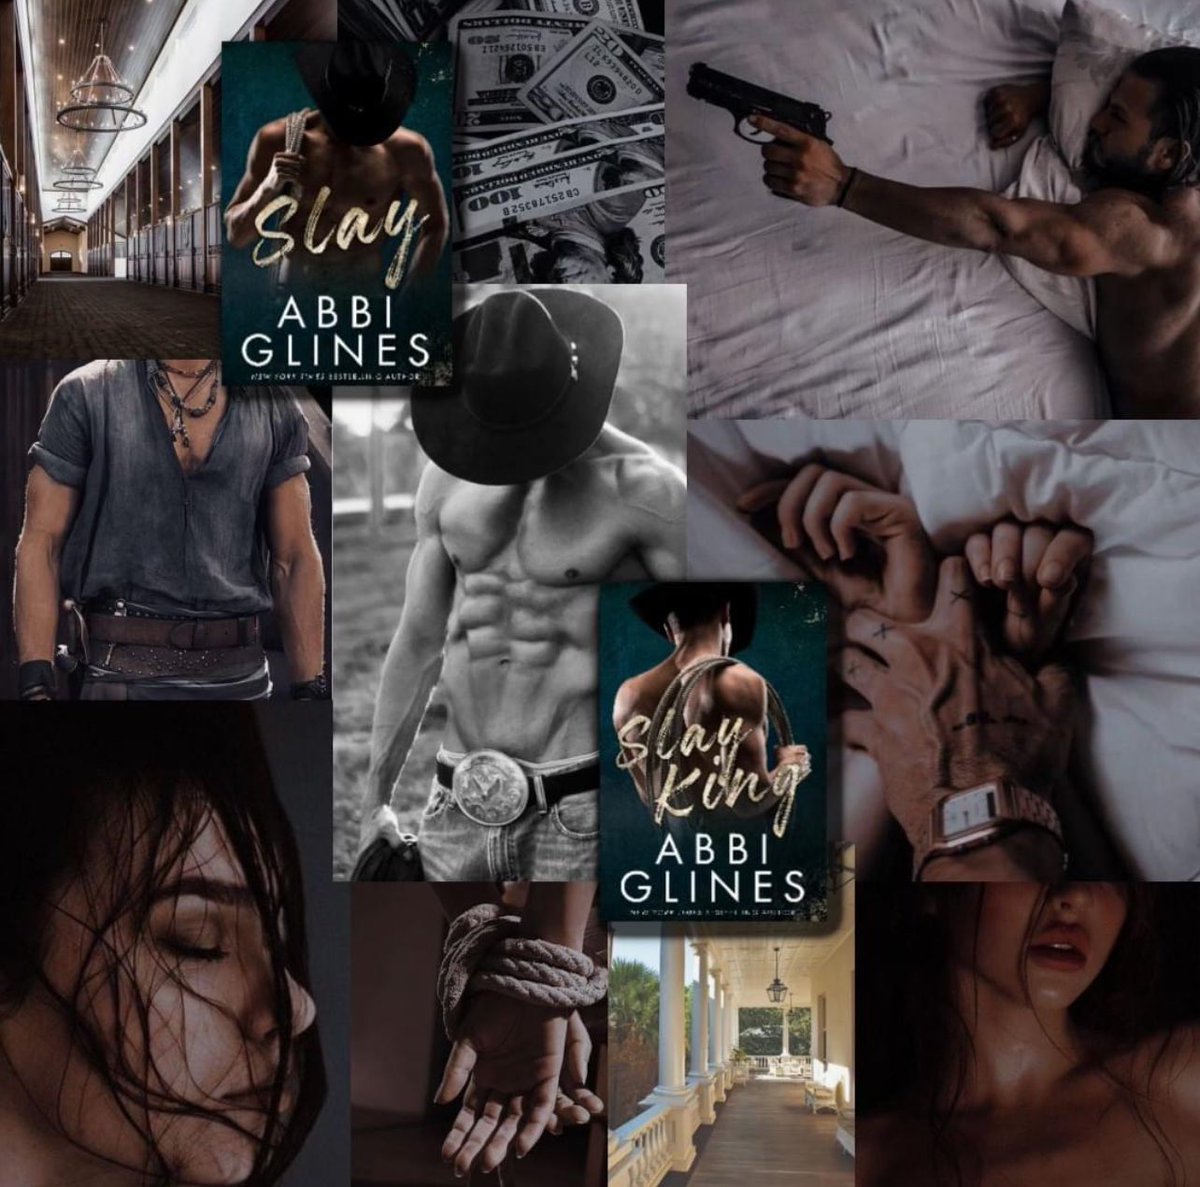 Their complete story is here! Check out my inspiration Pinterest Board for both books here: pin.it/OFj951OK5 Want to listen to my playlist for both books? Here you go: open.spotify.com/playlist/5Wbe5… 𝐒𝐥𝐚𝐲 geni.us/AGSlay 𝐒𝐥𝐚𝐲 𝐊𝐢𝐧𝐠 geni.us/slayking